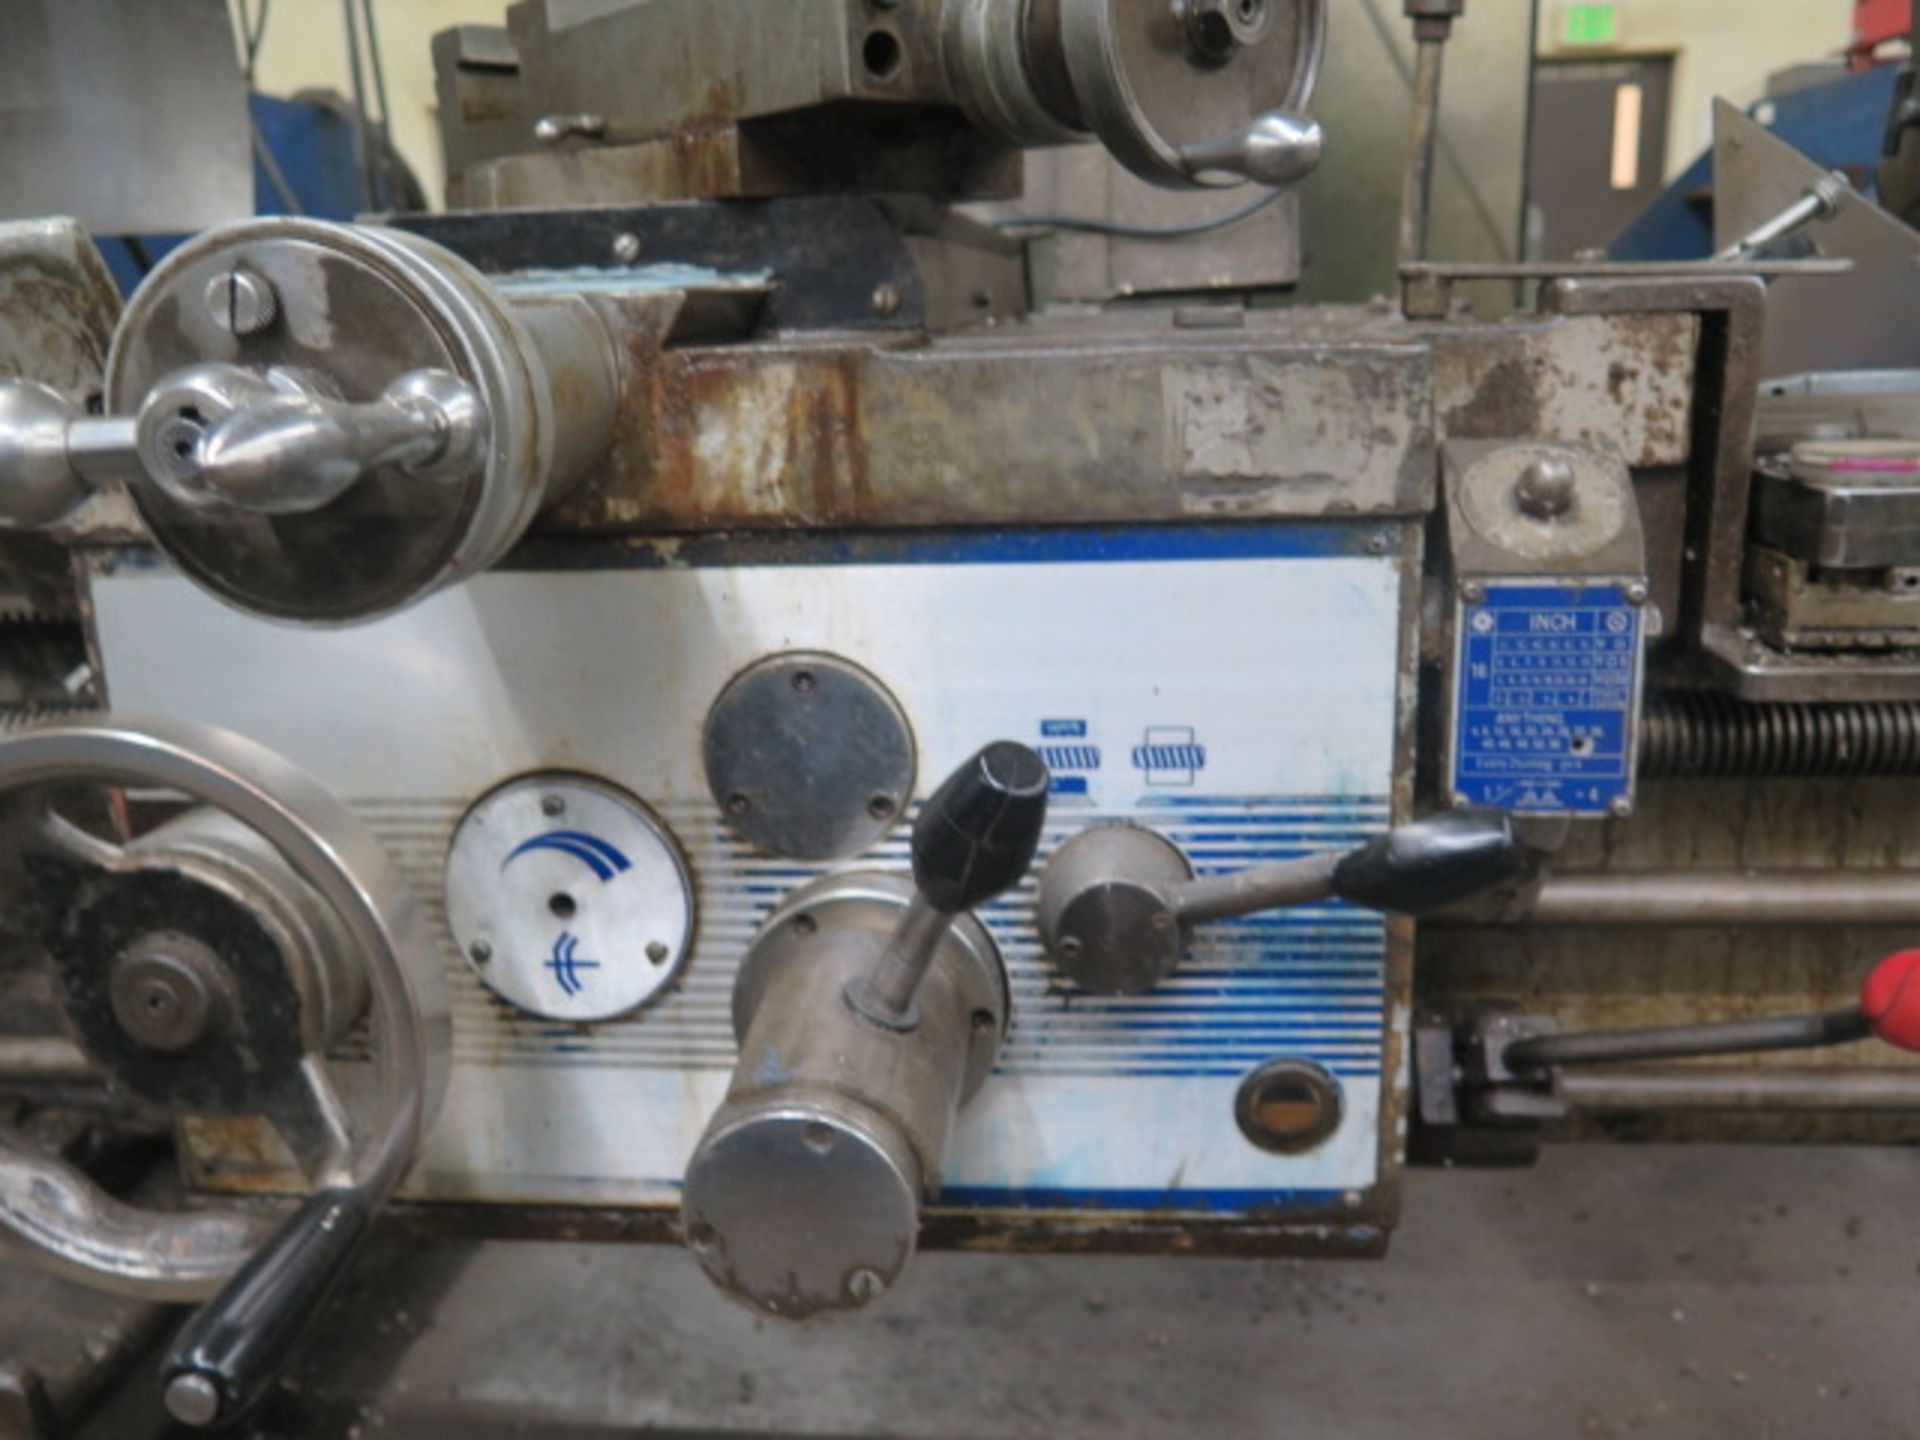 M Machinists 20” x 64” Geared Gap Bed Lathe w/ 25-1500 RPM, Inch/mm Threading, Tailstock, SOLD AS IS - Image 12 of 14